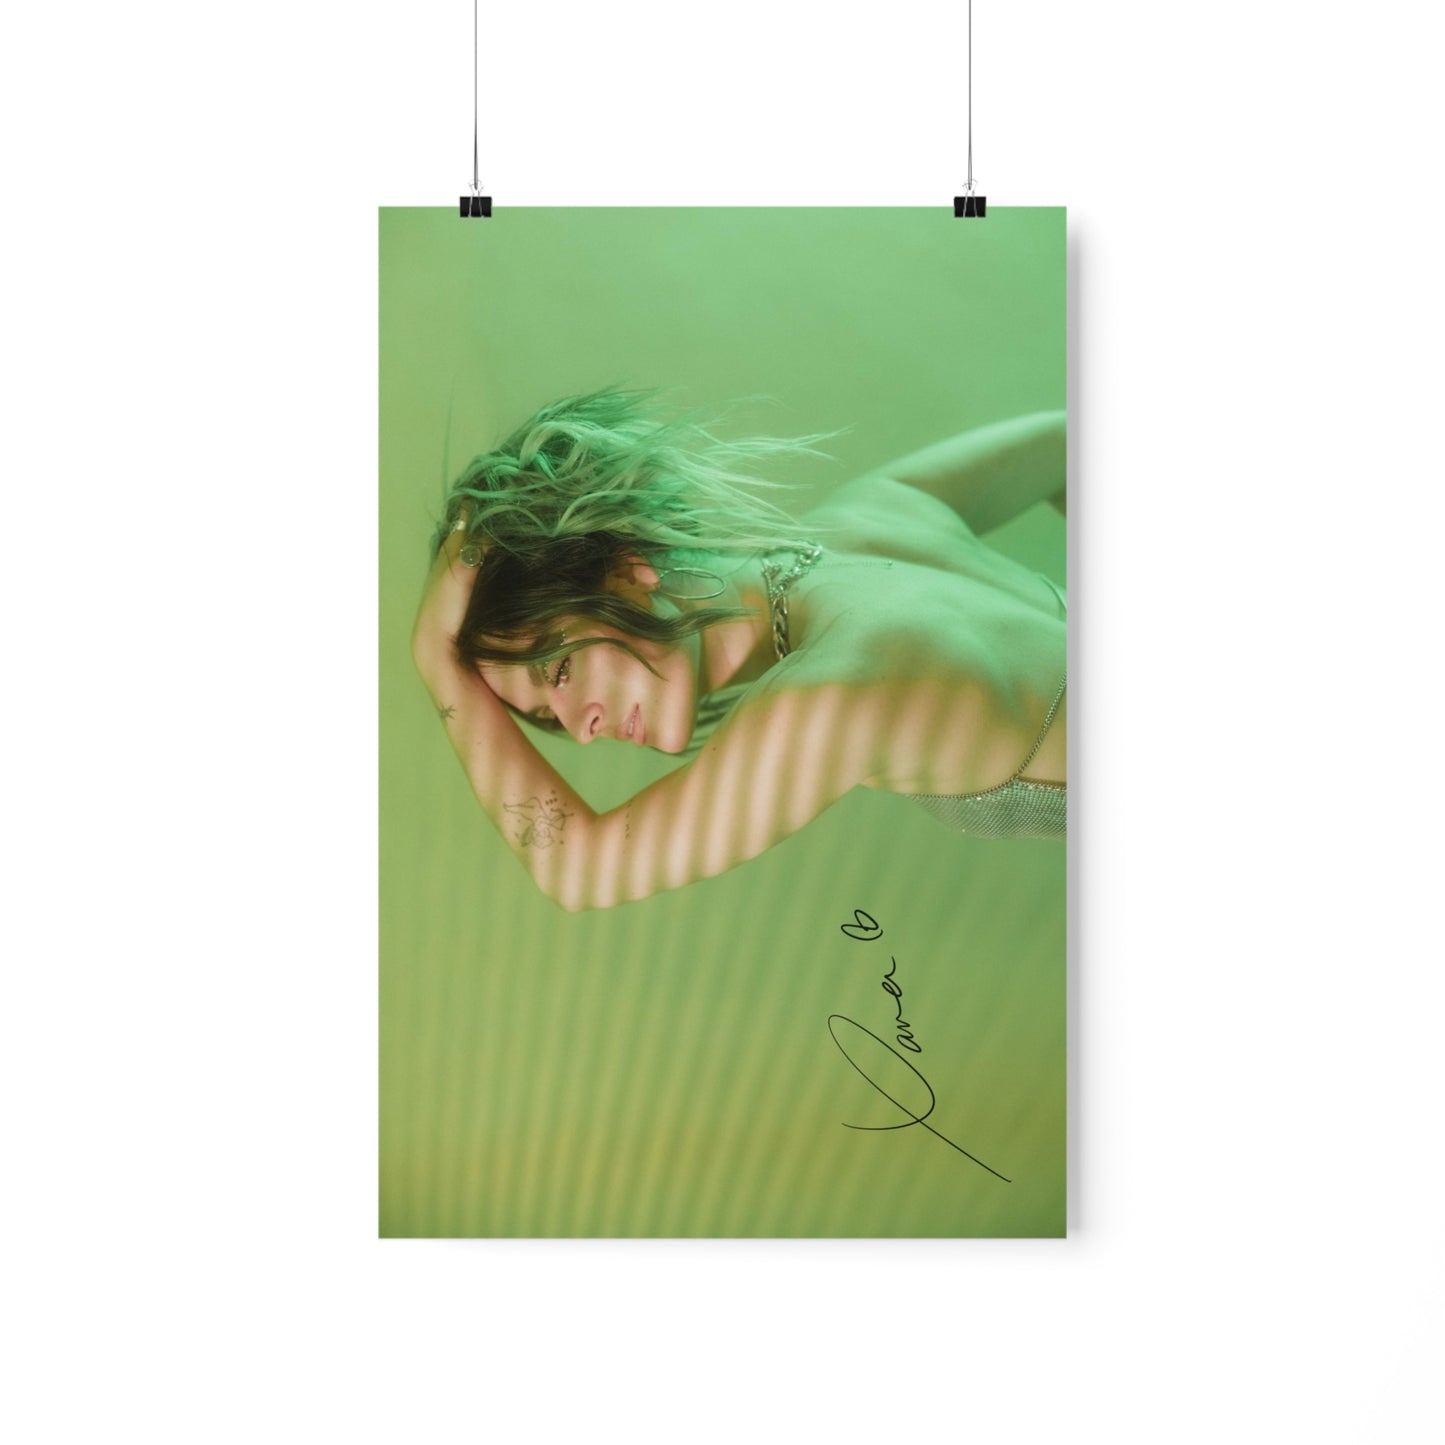 You See Green & Don't Think About Me - Signed Poster